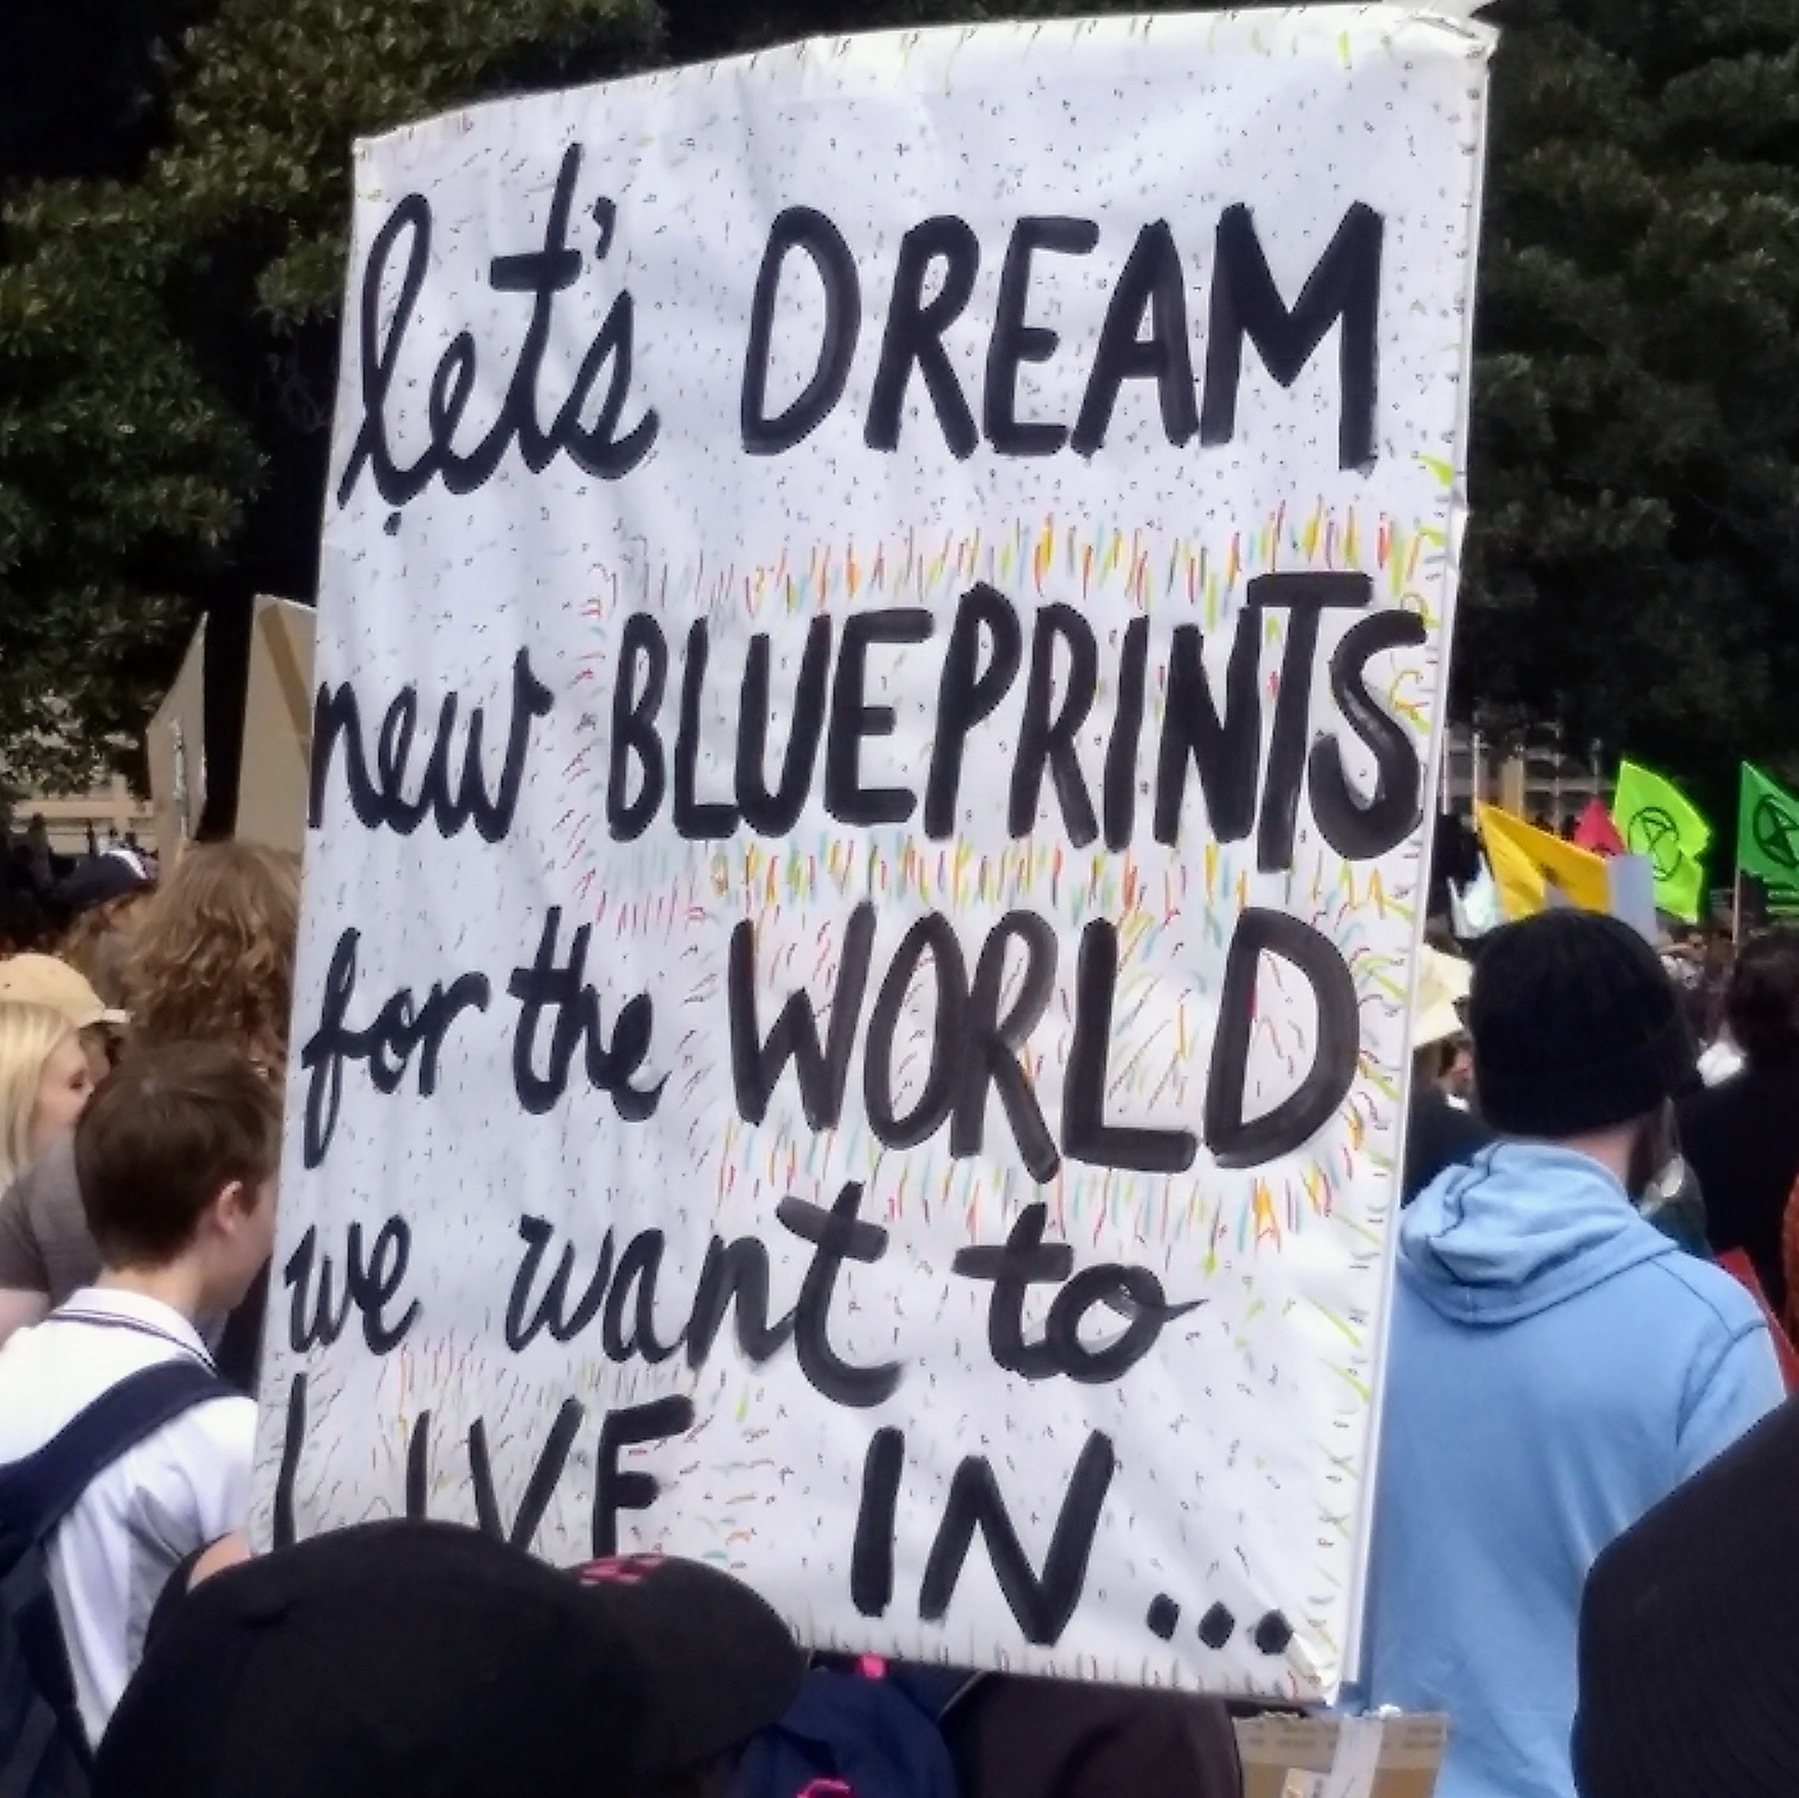 A demonstrator at a Sydney climate change protest holds up a hand-written sign that reads: Let's dream new blueprints for the world we want to live in.